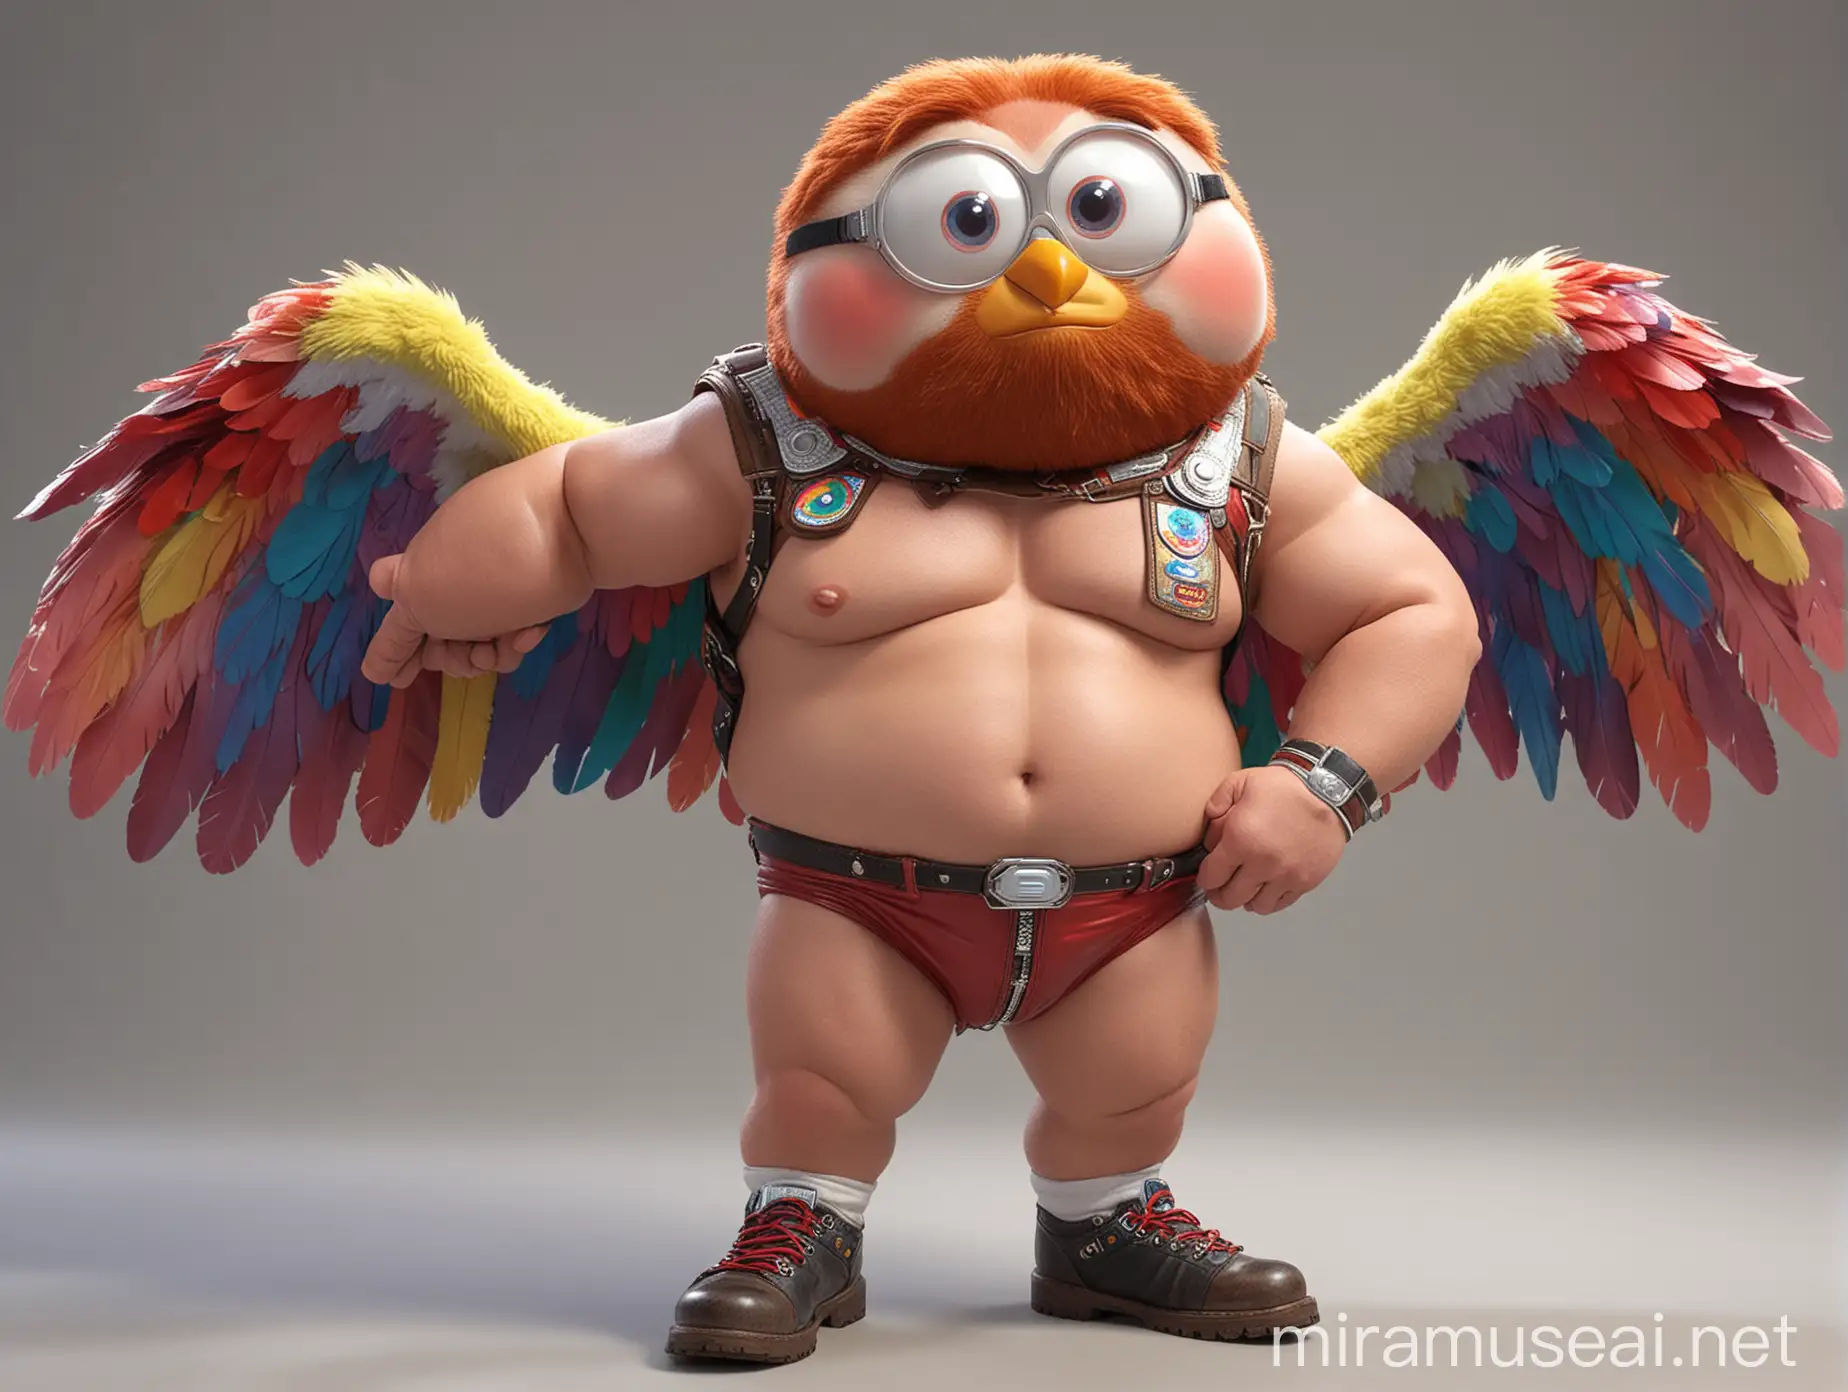 Studio Light Subtle Smile Topless 40s Ultra beefy Red Head Bodybuilder Daddy Big Eyes with Beard Flexing Bicep Wearing Multi-Highlighter Bright Rainbow Colored See Through huge Eagle Wings Shoulder Jacket short shorts long legs low leather boots and Doraemon Goggles on forehead